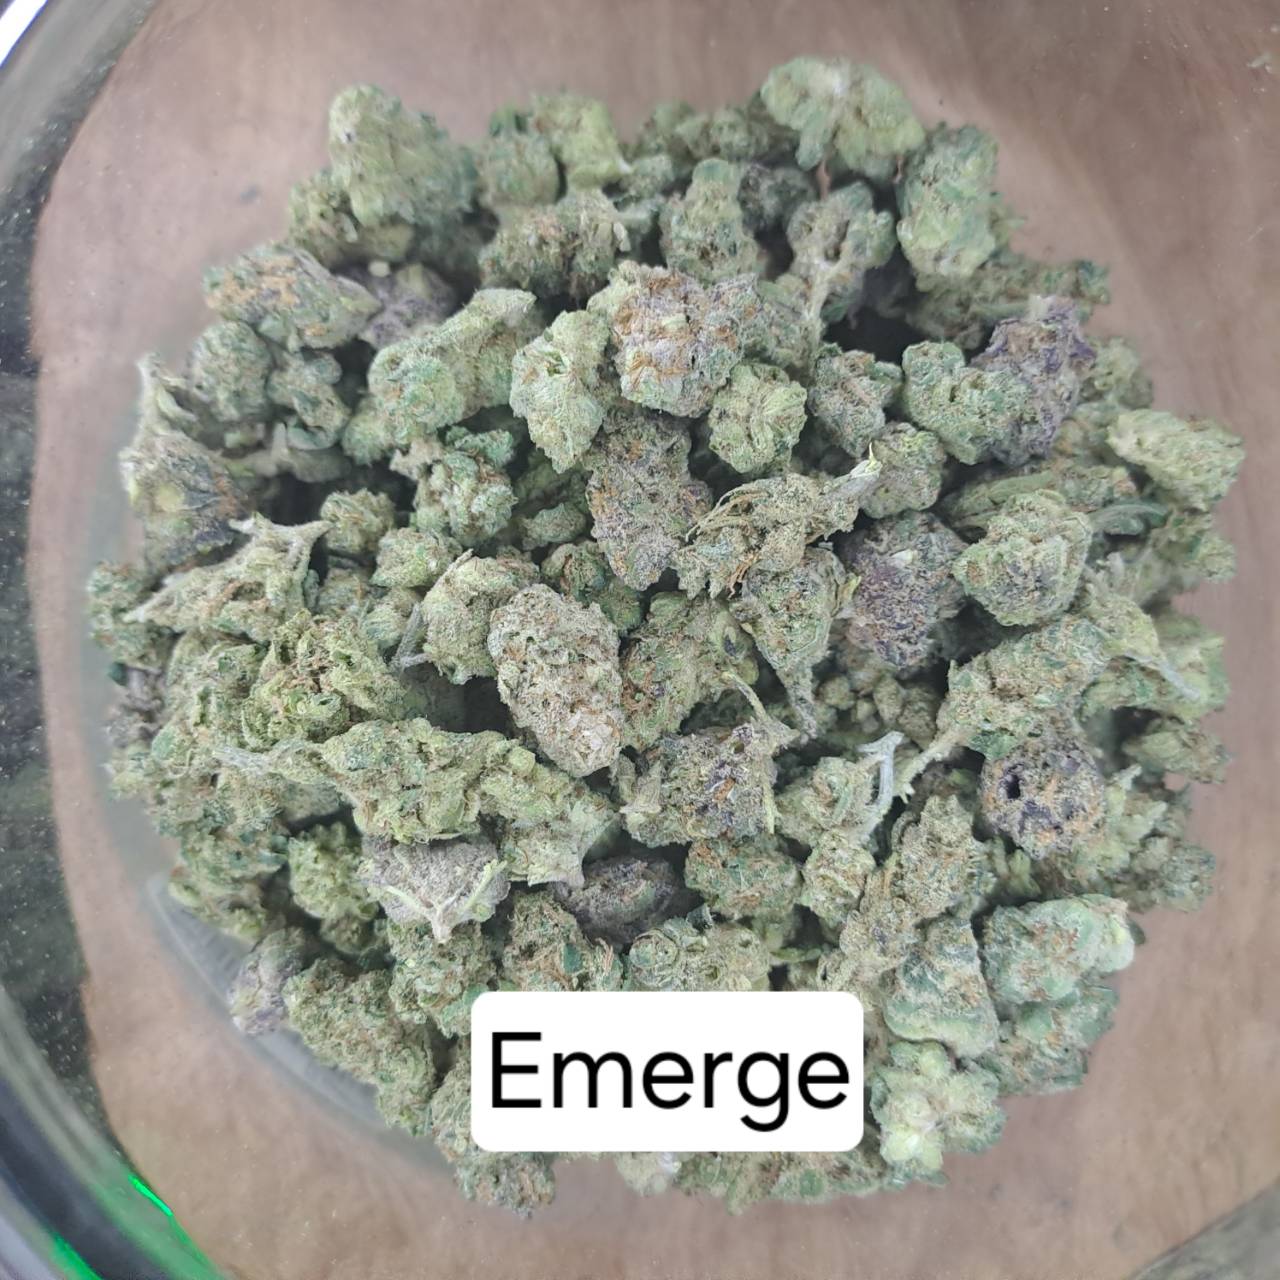 Product Image for Emerge